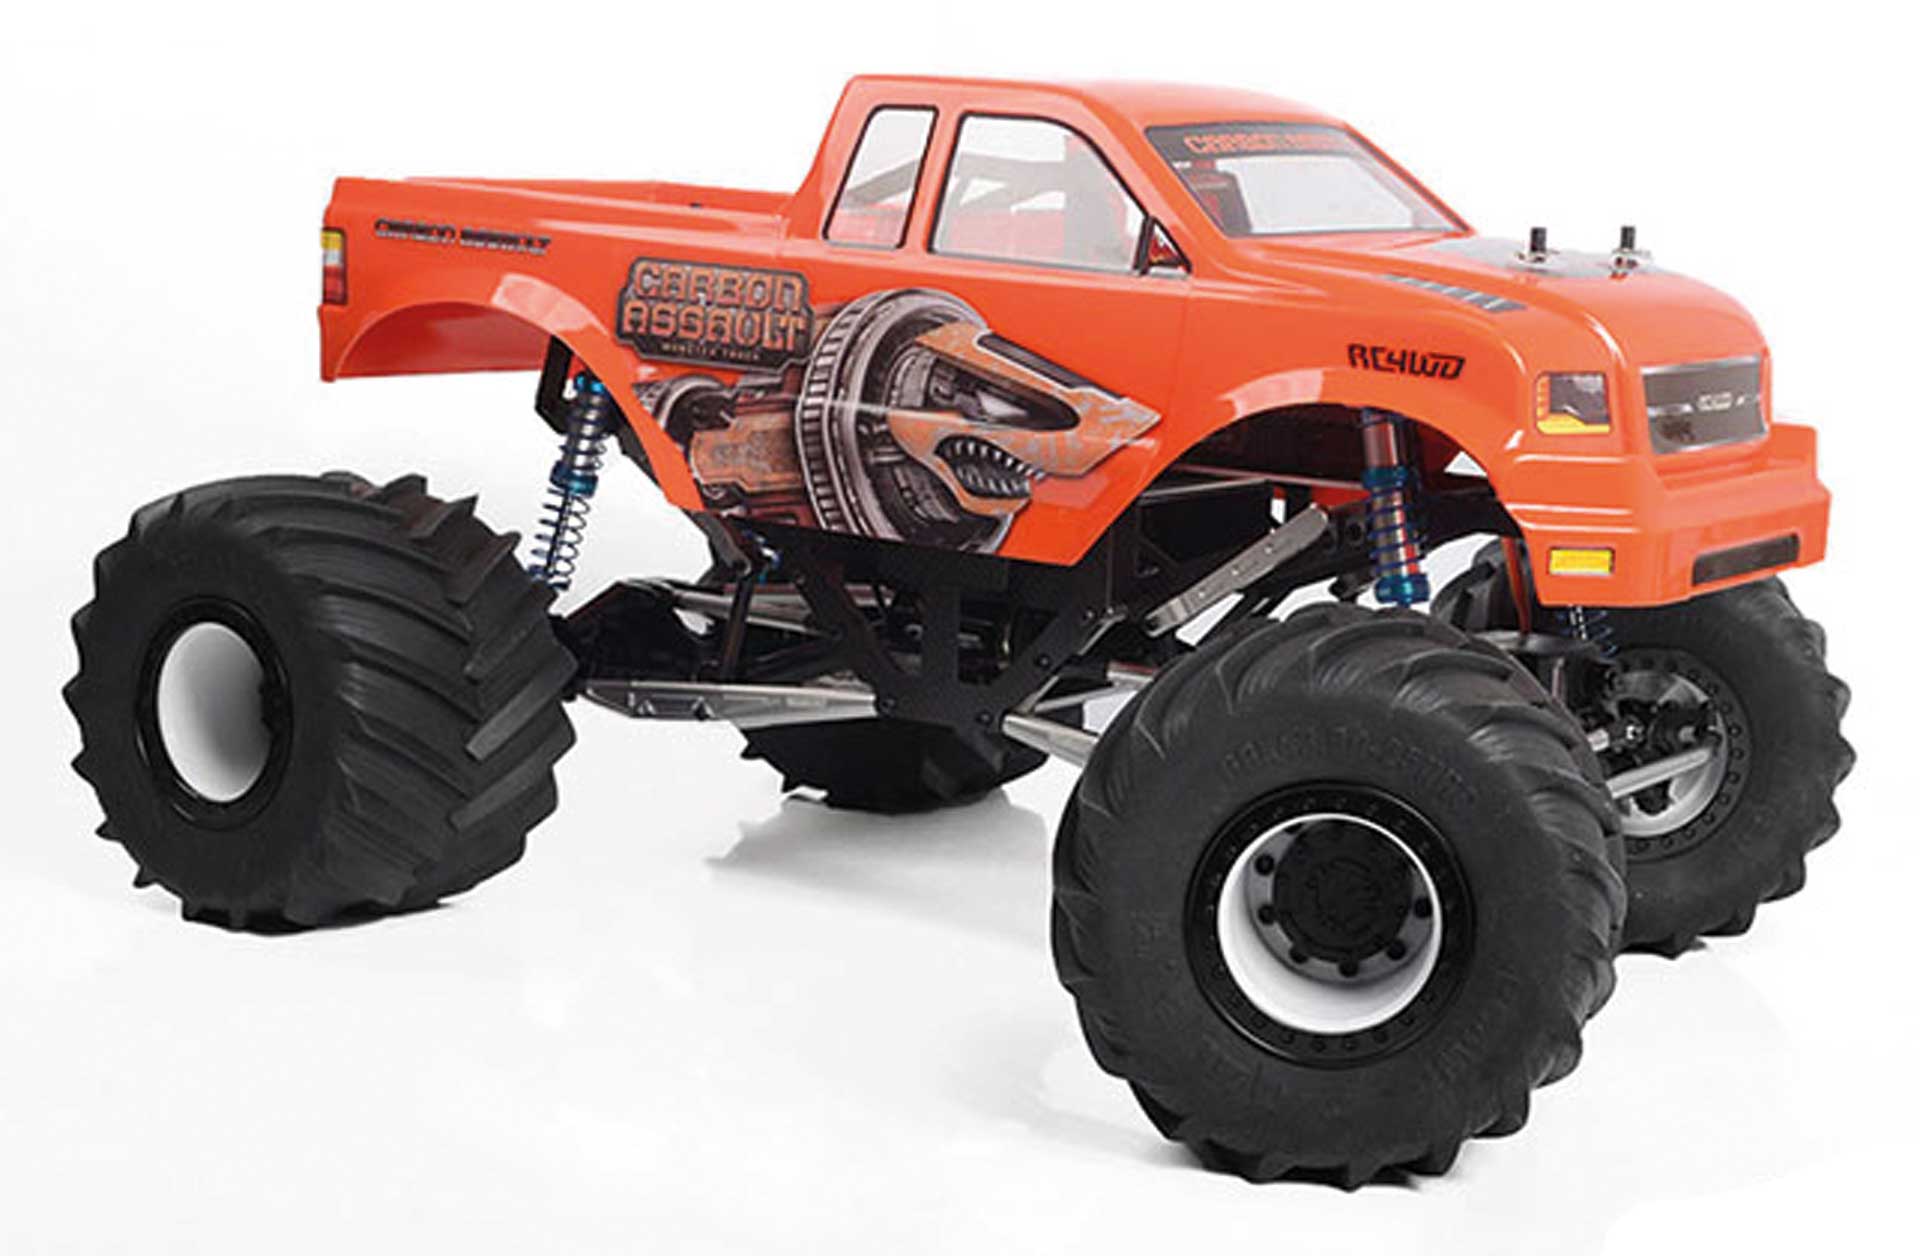 RC4WD CARBON ASSAULT 1/10TH MONSTER TRUCK